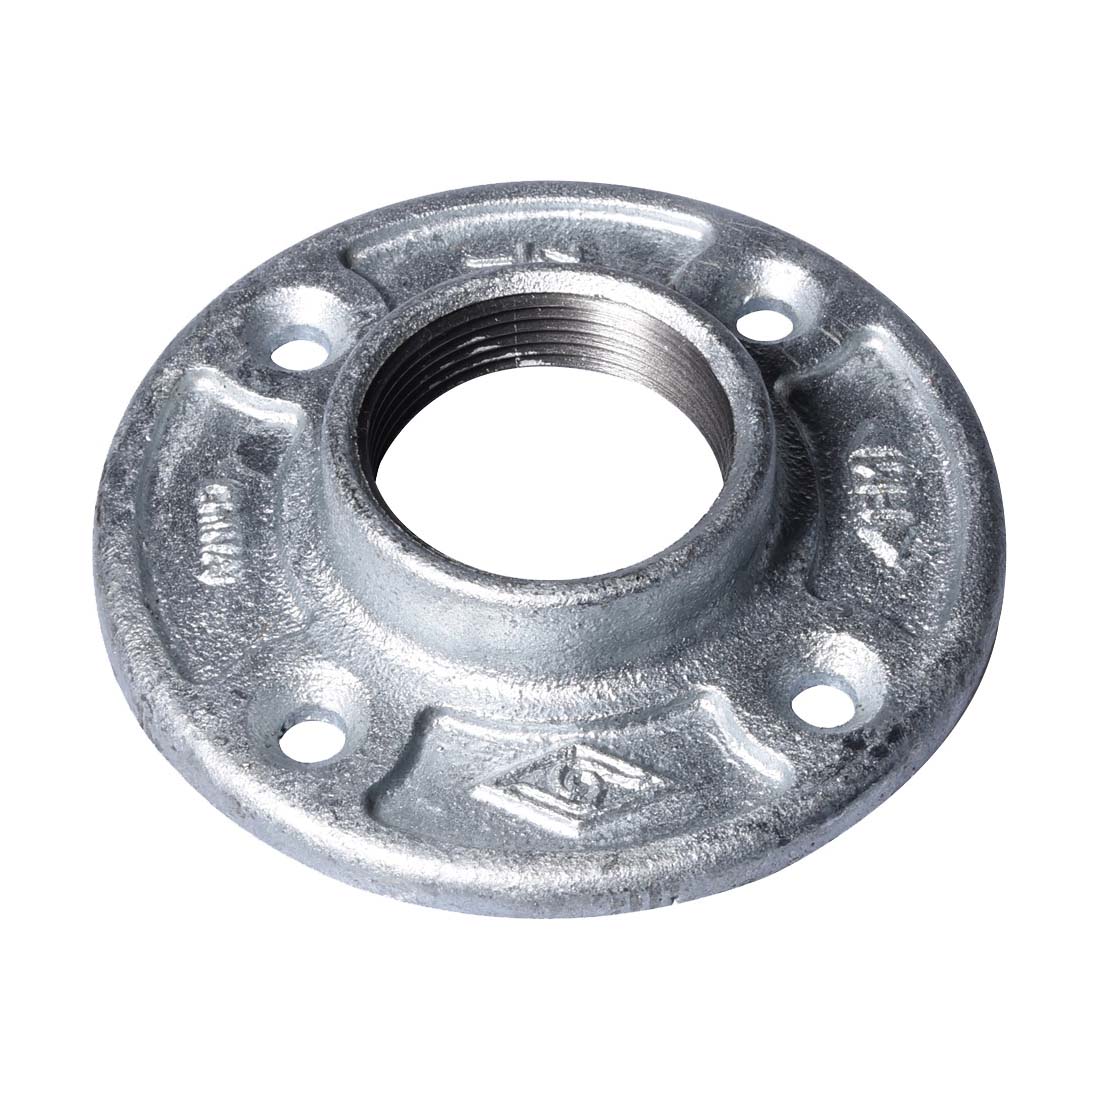 Worldwide Sourcing 27-11/2G Floor Flange, 1-1/2 in, 4.6 in Dia Flange, FIP, 4-Bolt Hole, 0.89 in L Through Bore - 1